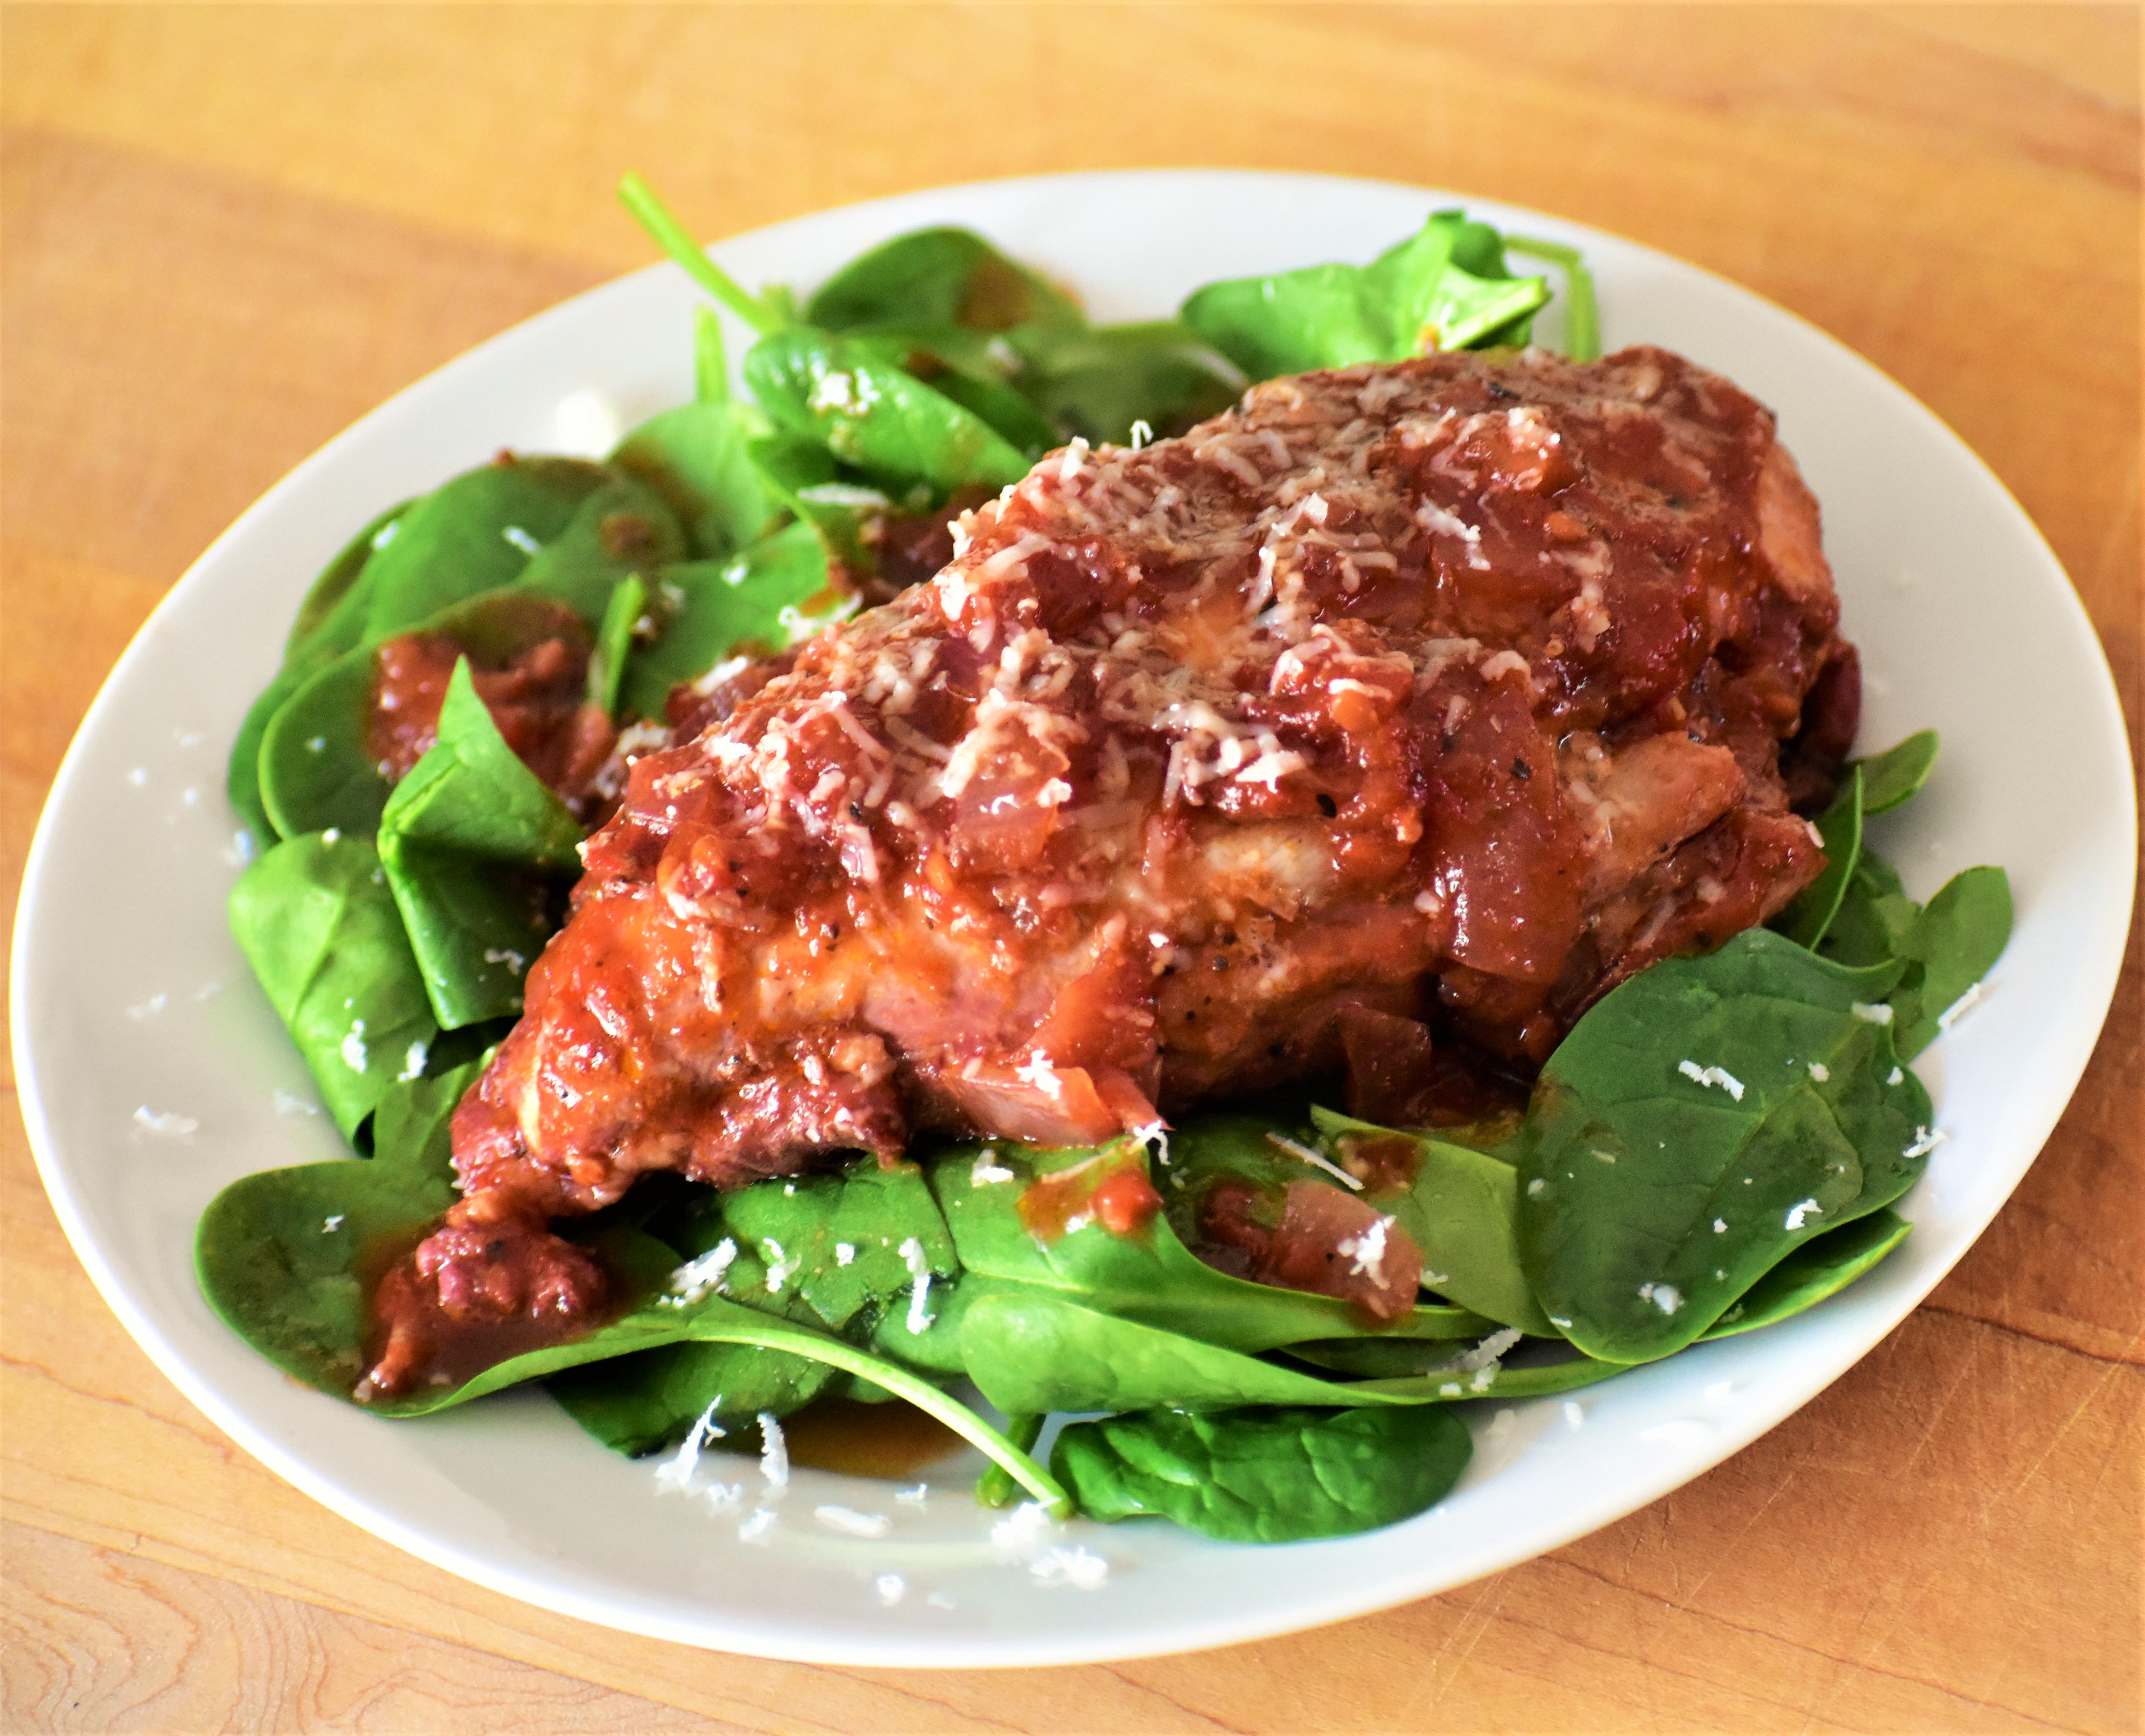 Juicy Chicken Breasts with Tomato-Shiraz Reduction